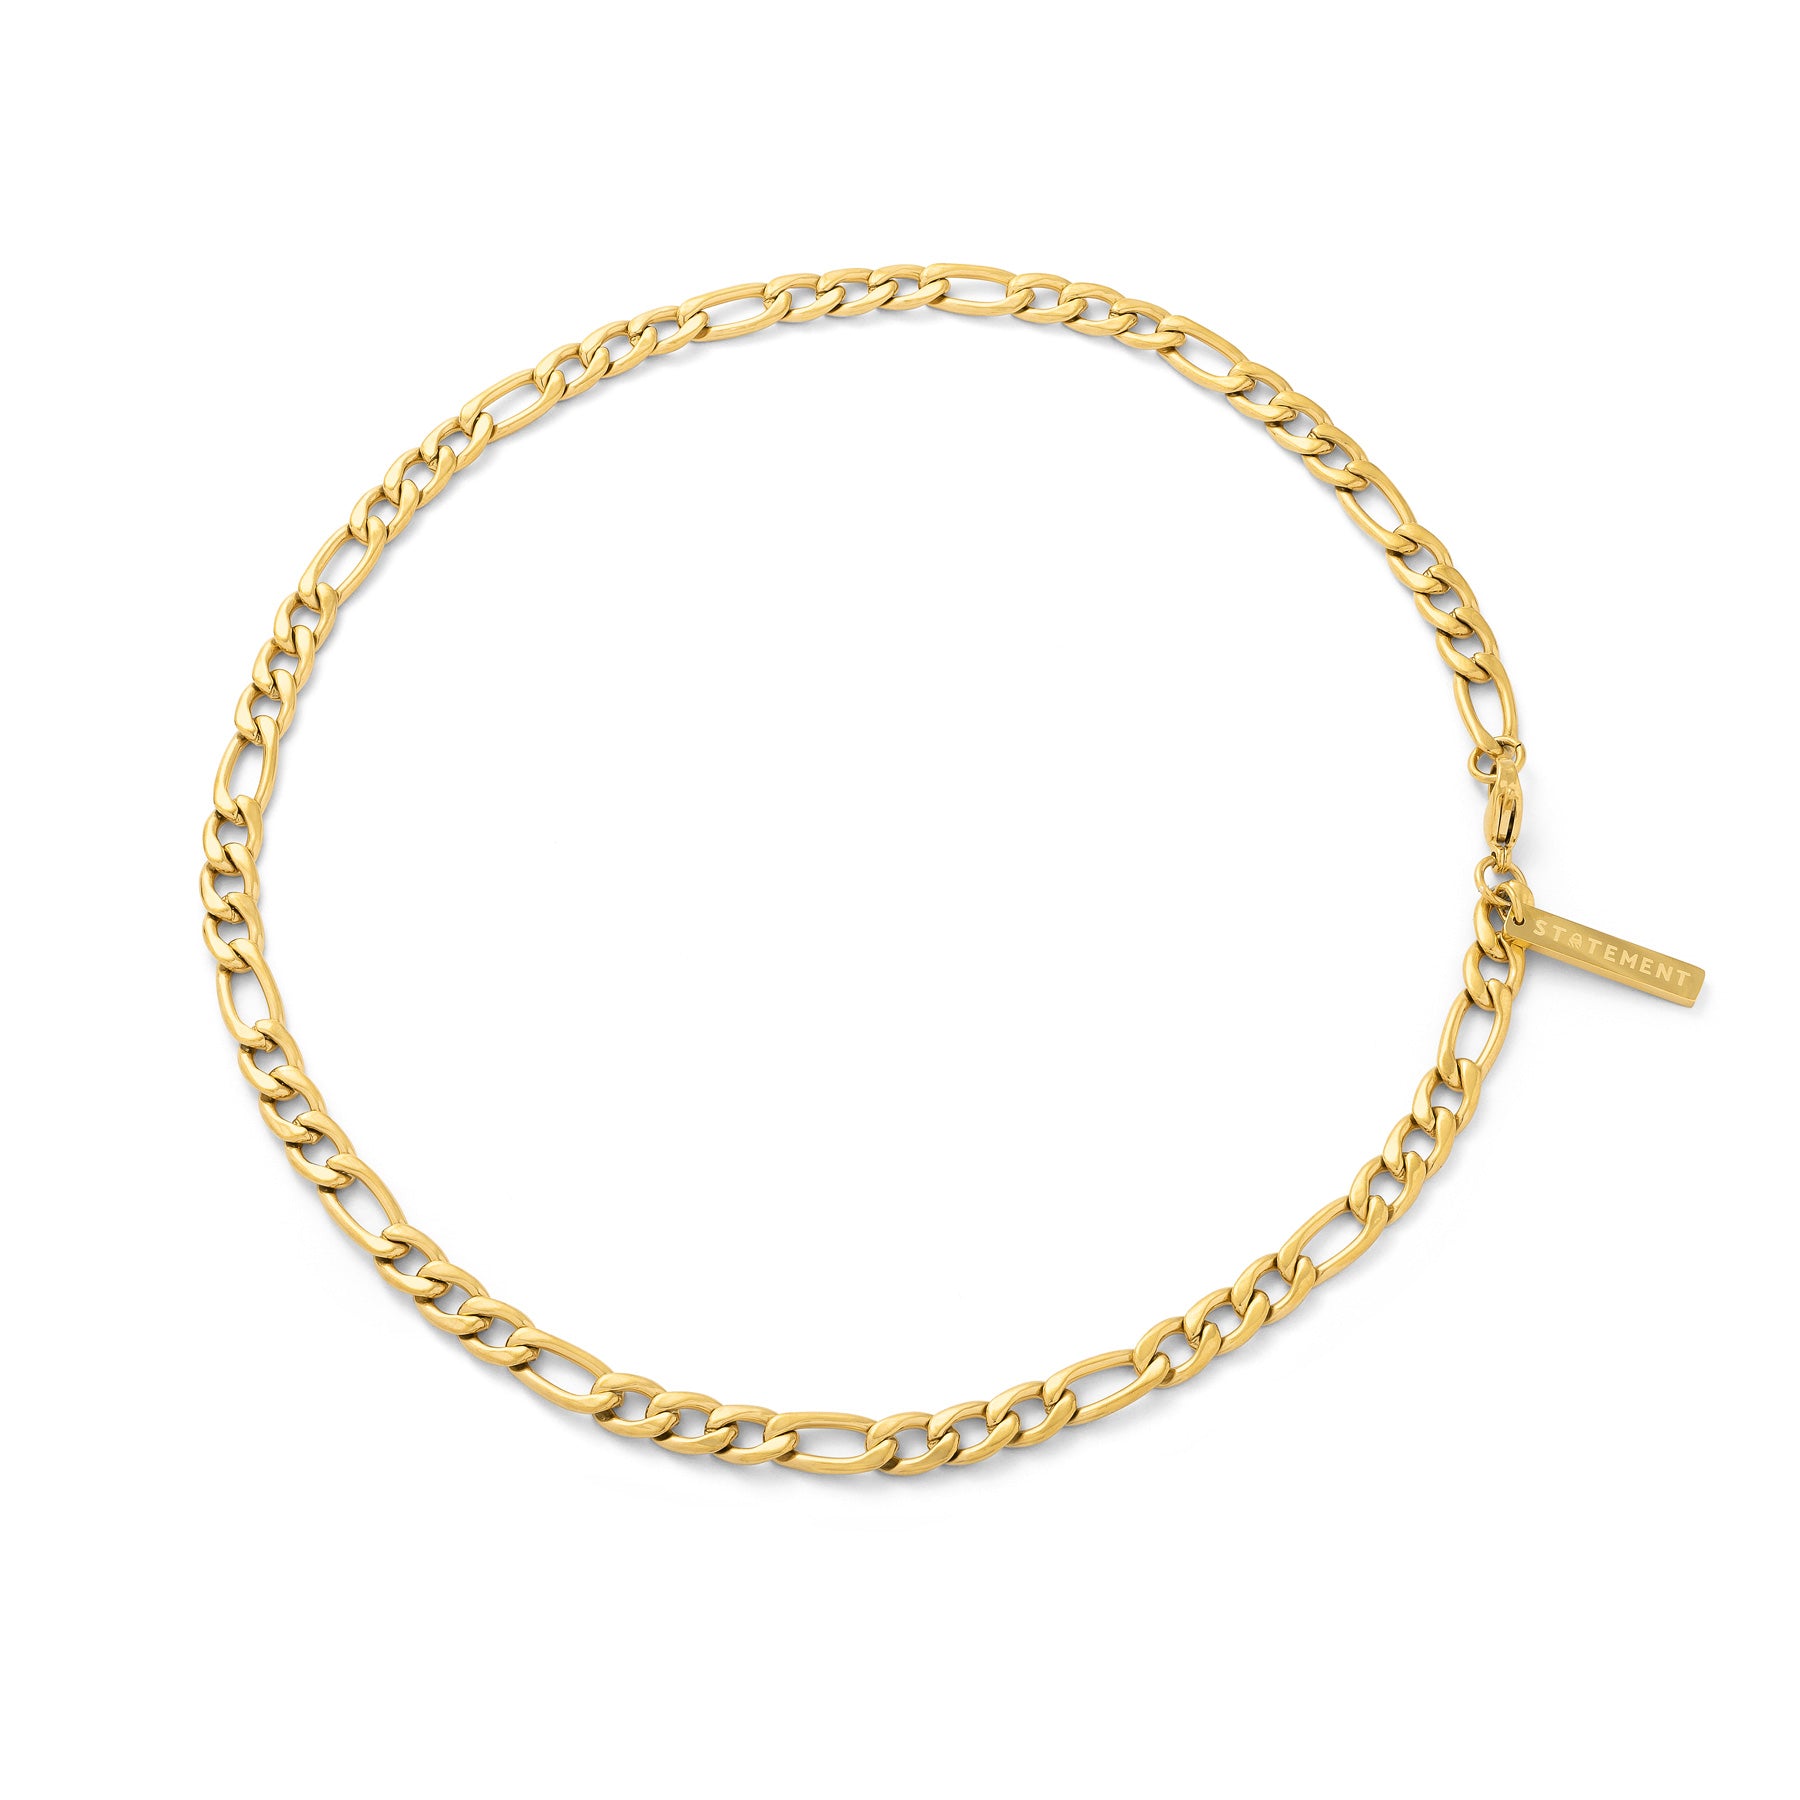 Thick gold Figaro chain necklace on white background